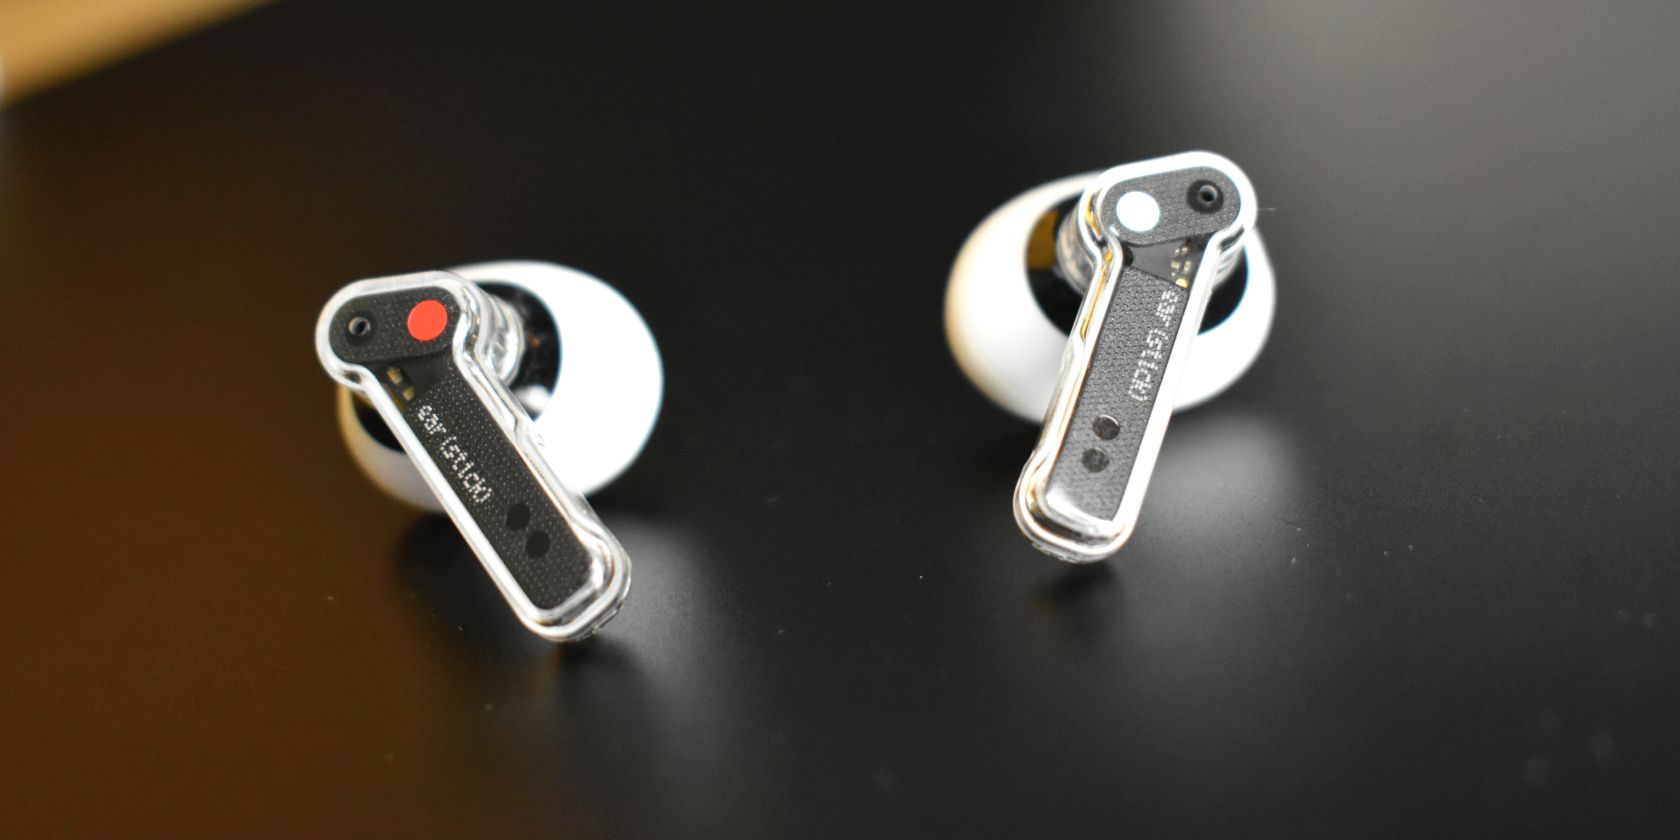 Nothing Ear Stick Review: Great Looking Budget Earbuds Hit the Spot